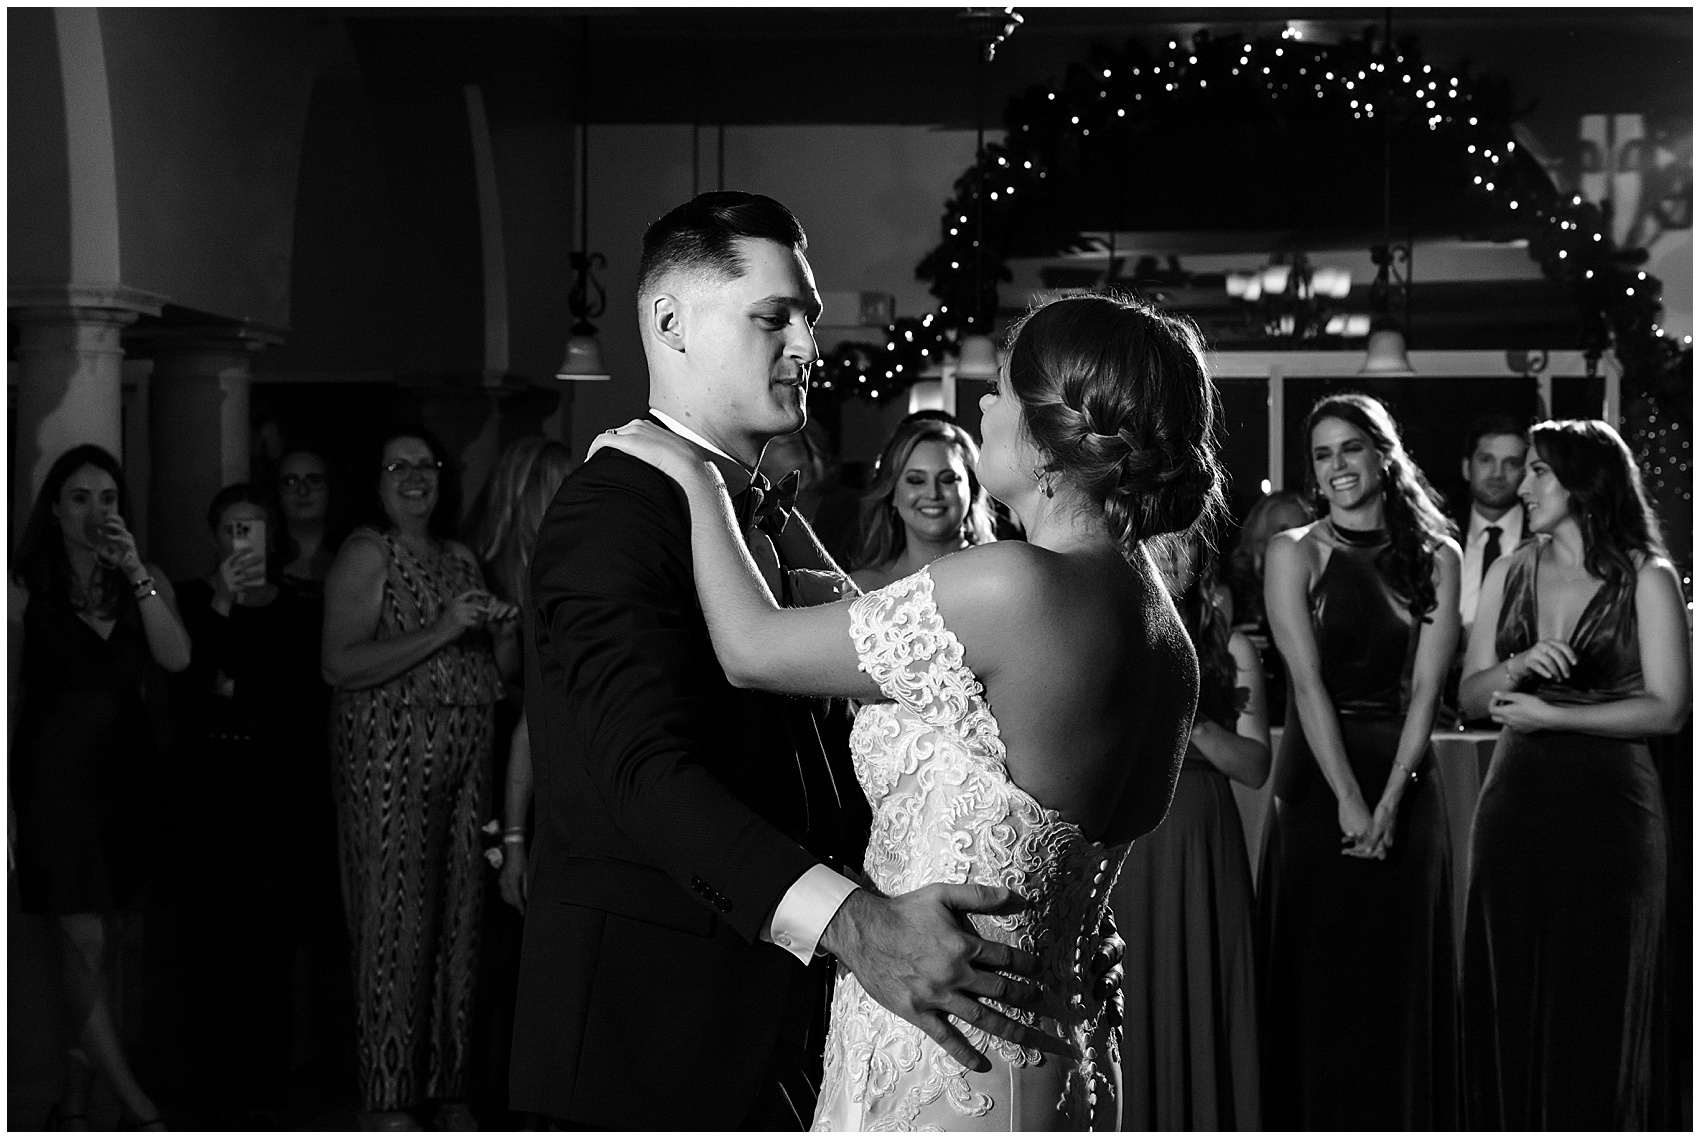 Newlyweds dance for the first time surrounded by guests at their club continental wedding